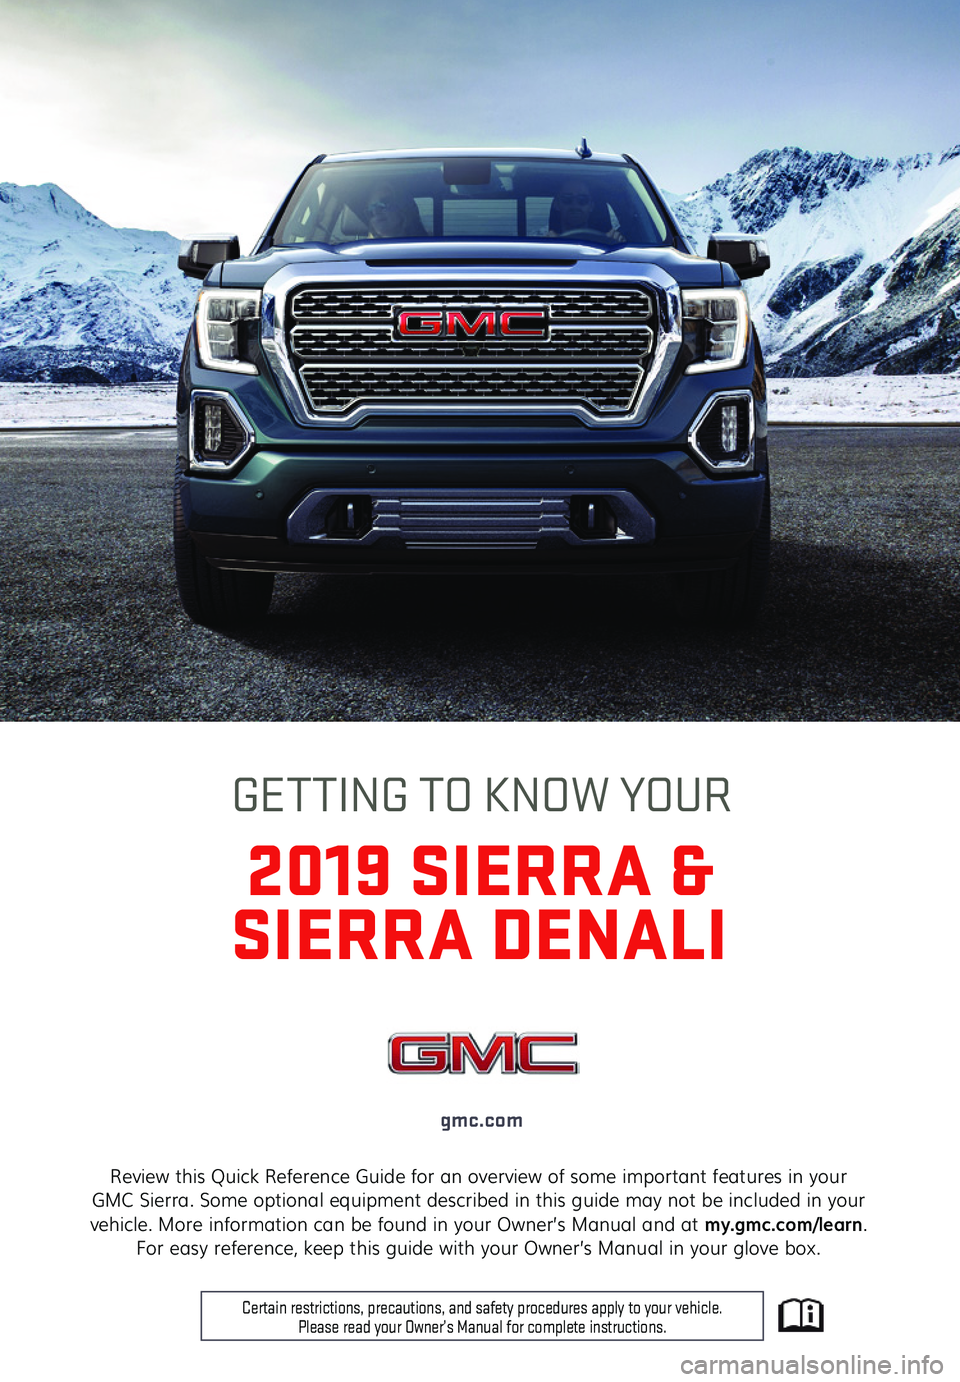 GMC SIERRA 2019  Get To Know Guide 1
Review this Quick Reference Guide for an overview of some important features in your  GMC Sierra. Some optional equipment described in this guide may not be included in your  vehicle. More informati